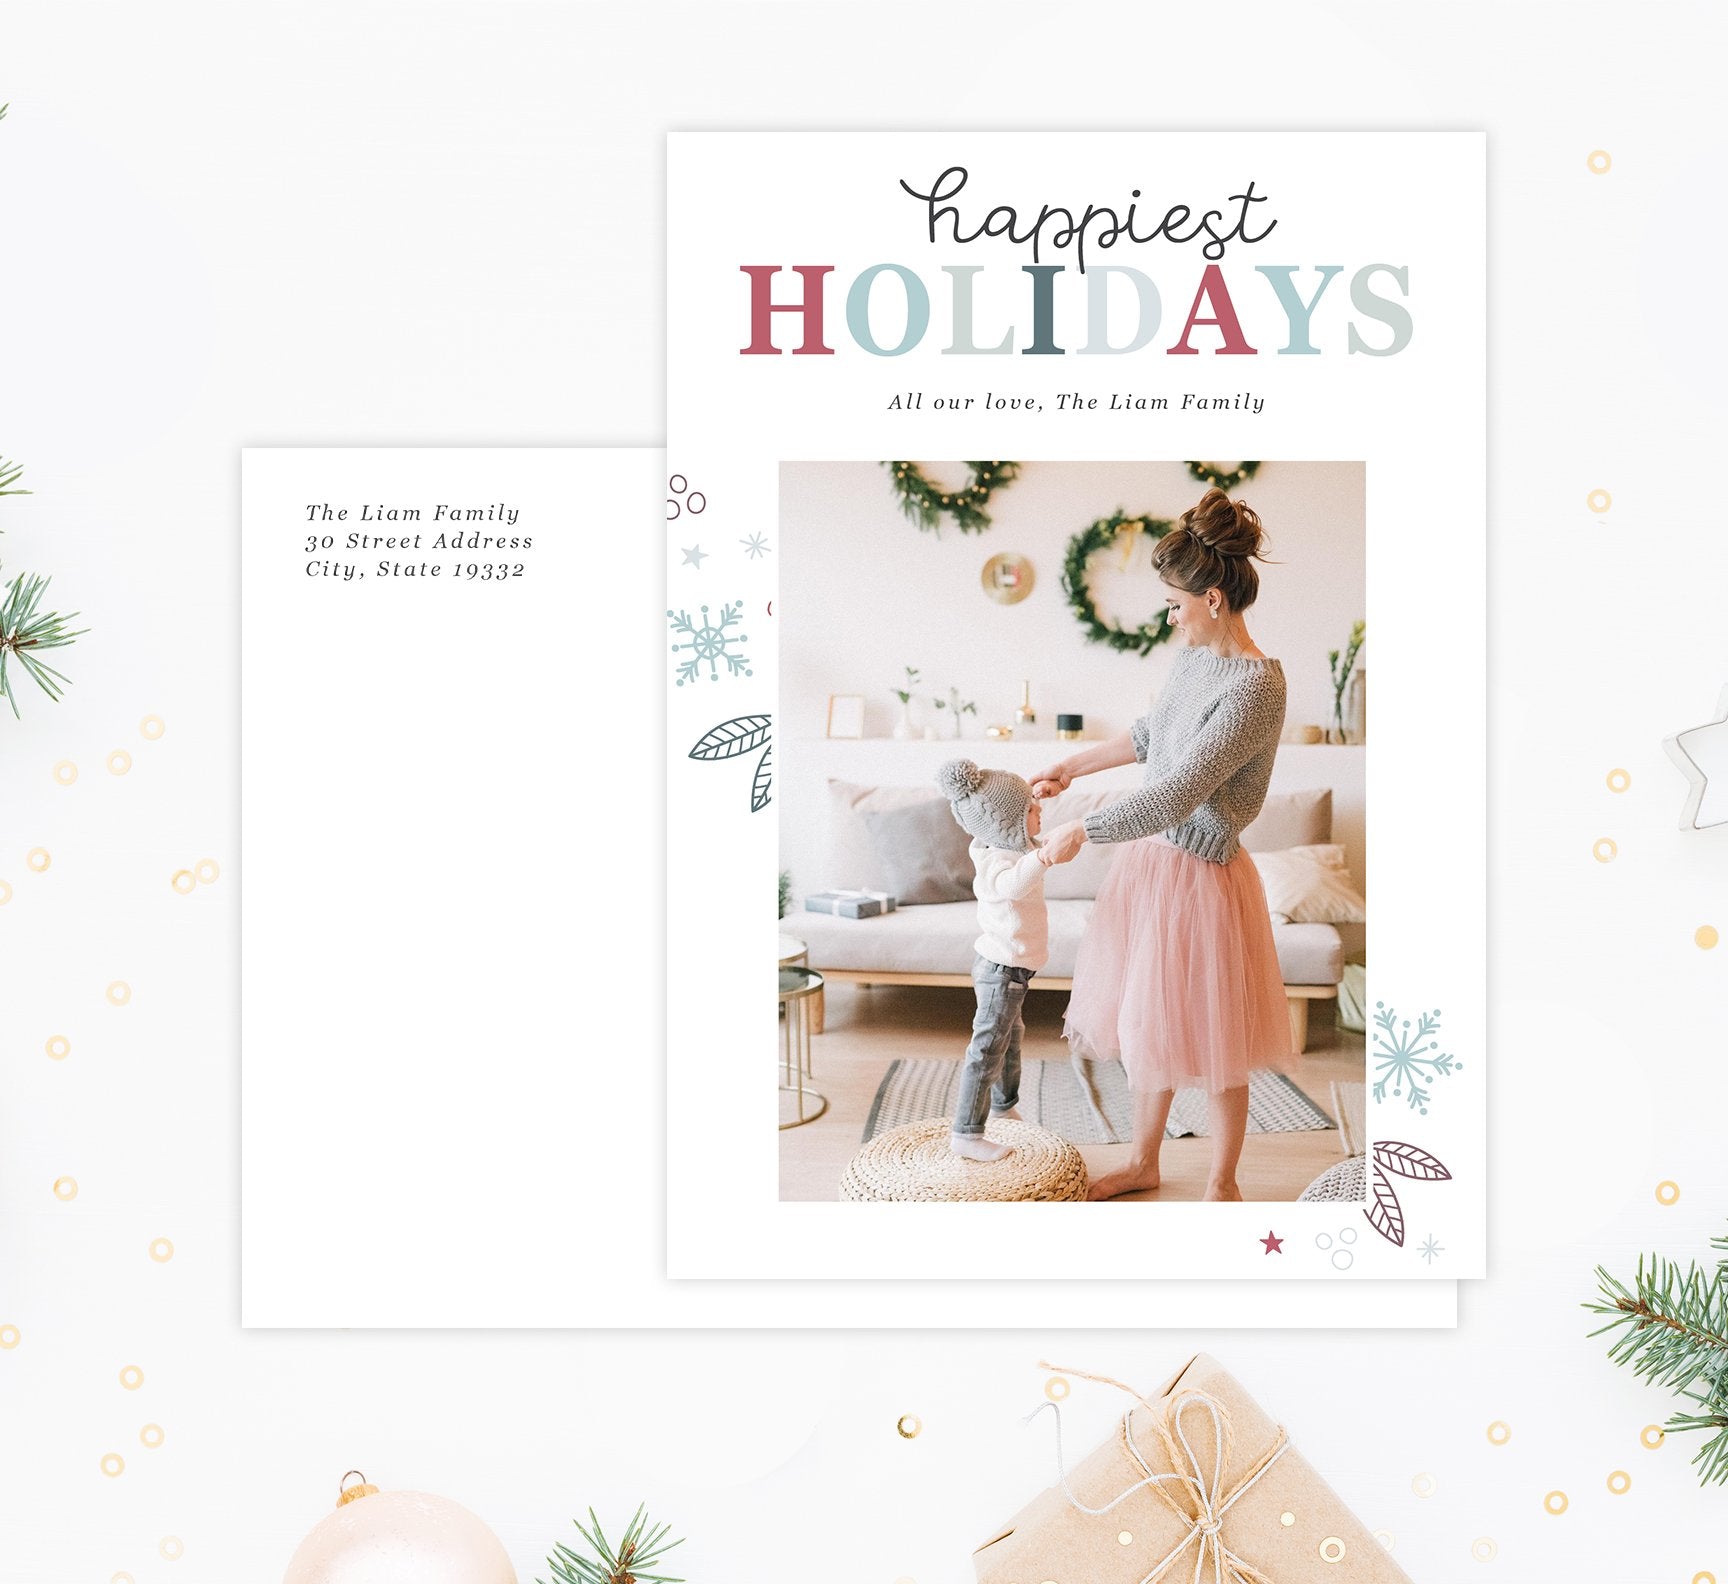 Happiest Holidays Holiday Card Mockup; Holiday card with envelope and return address printed on it. 